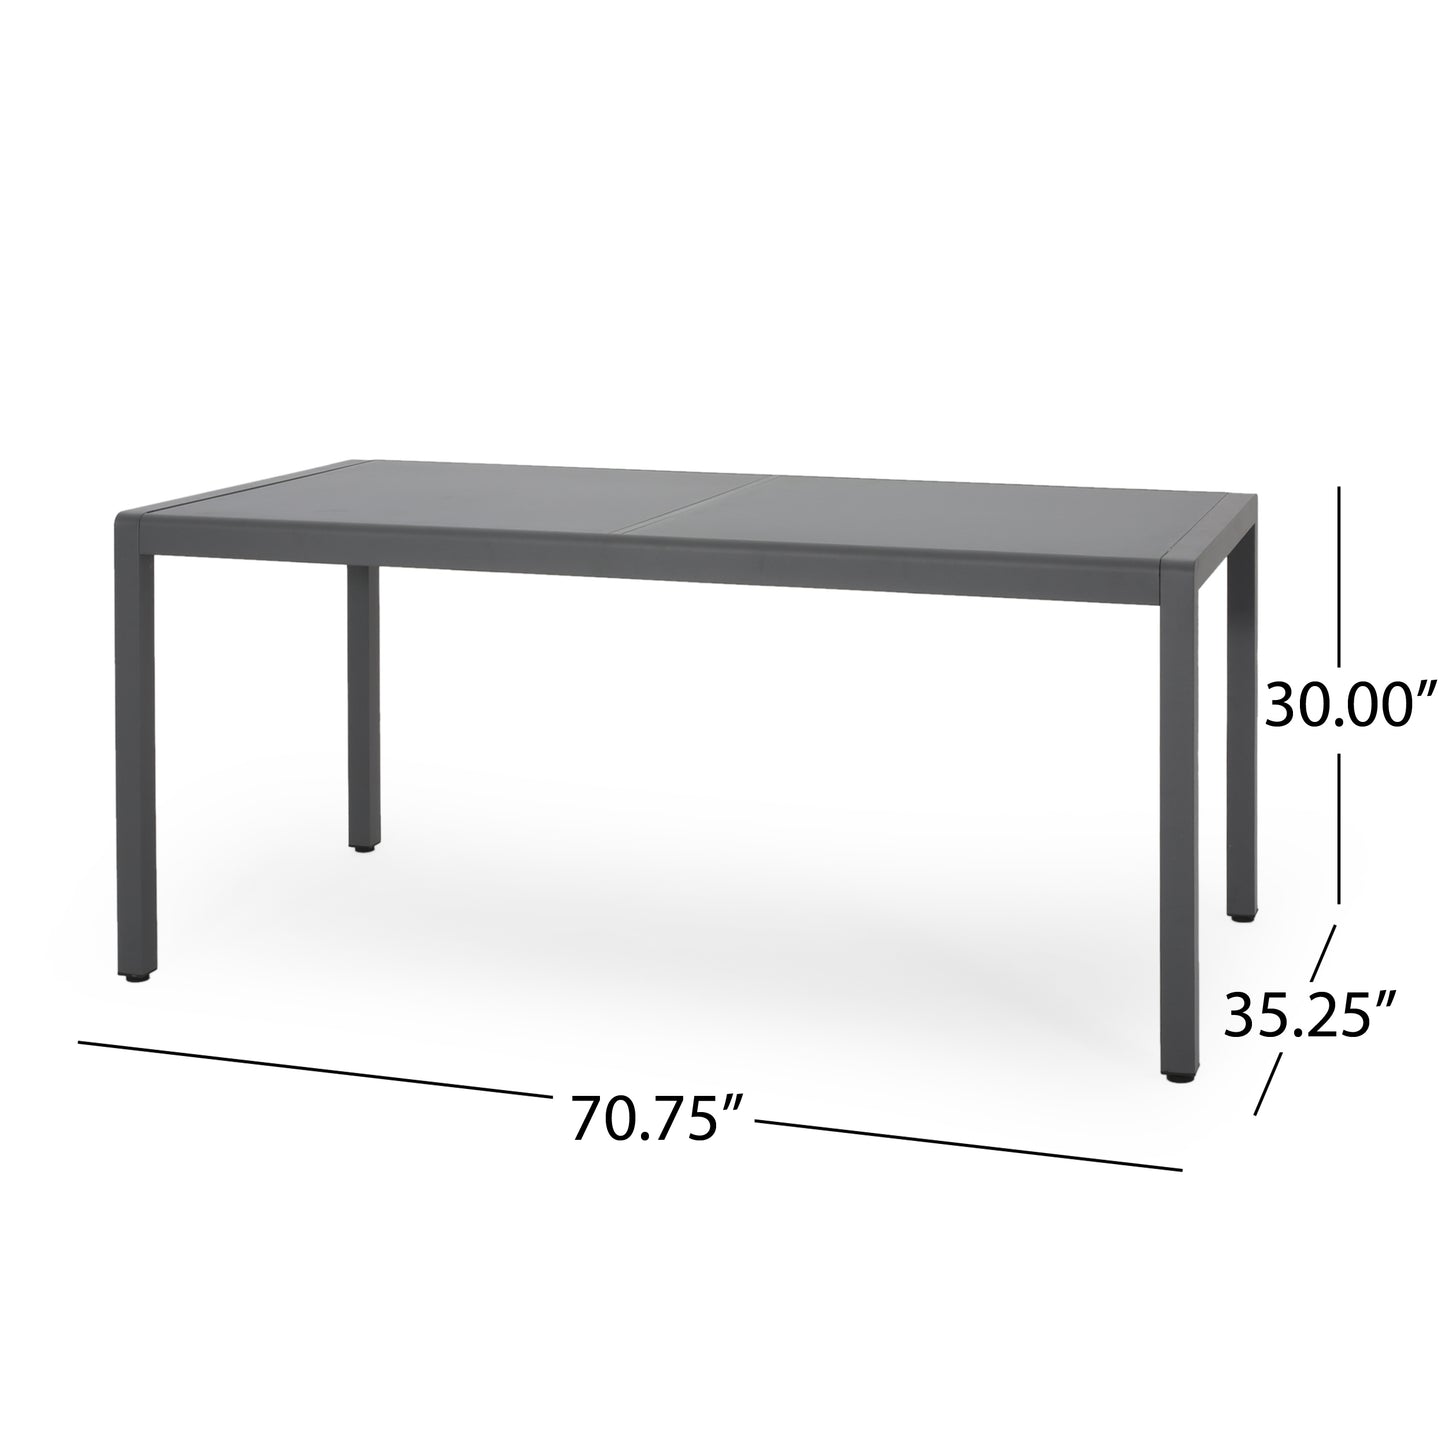 Cherie Outdoor Aluminum Dining Table with Tempered Glass Table Top